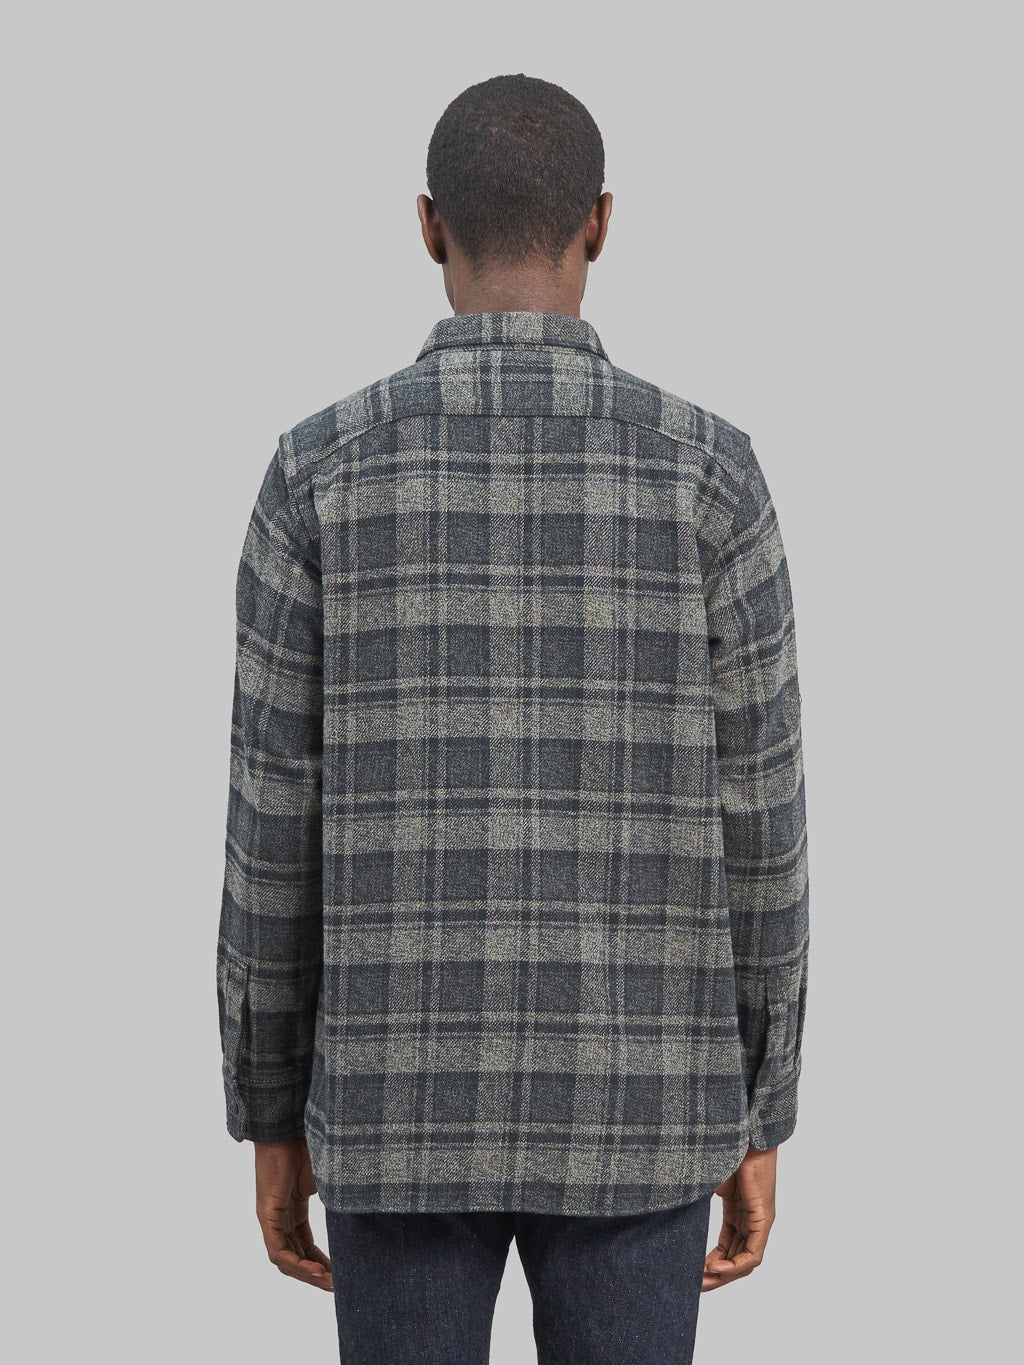 Fob Factory F3497 Nel Check Work flannel Shirt grey model back fit